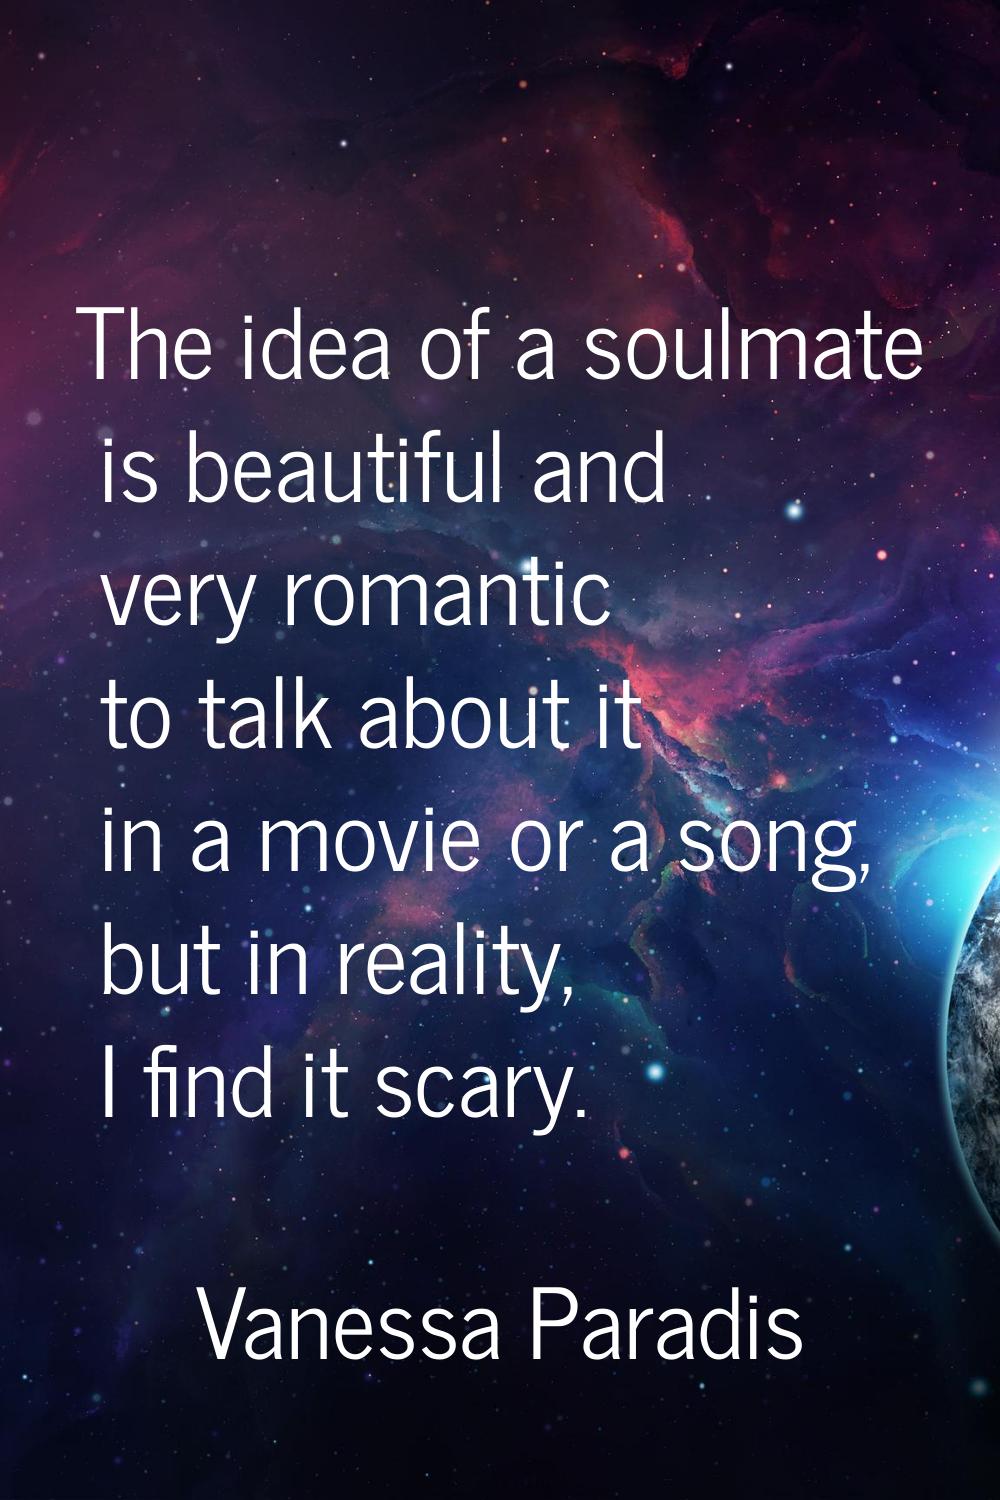 The idea of a soulmate is beautiful and very romantic to talk about it in a movie or a song, but in